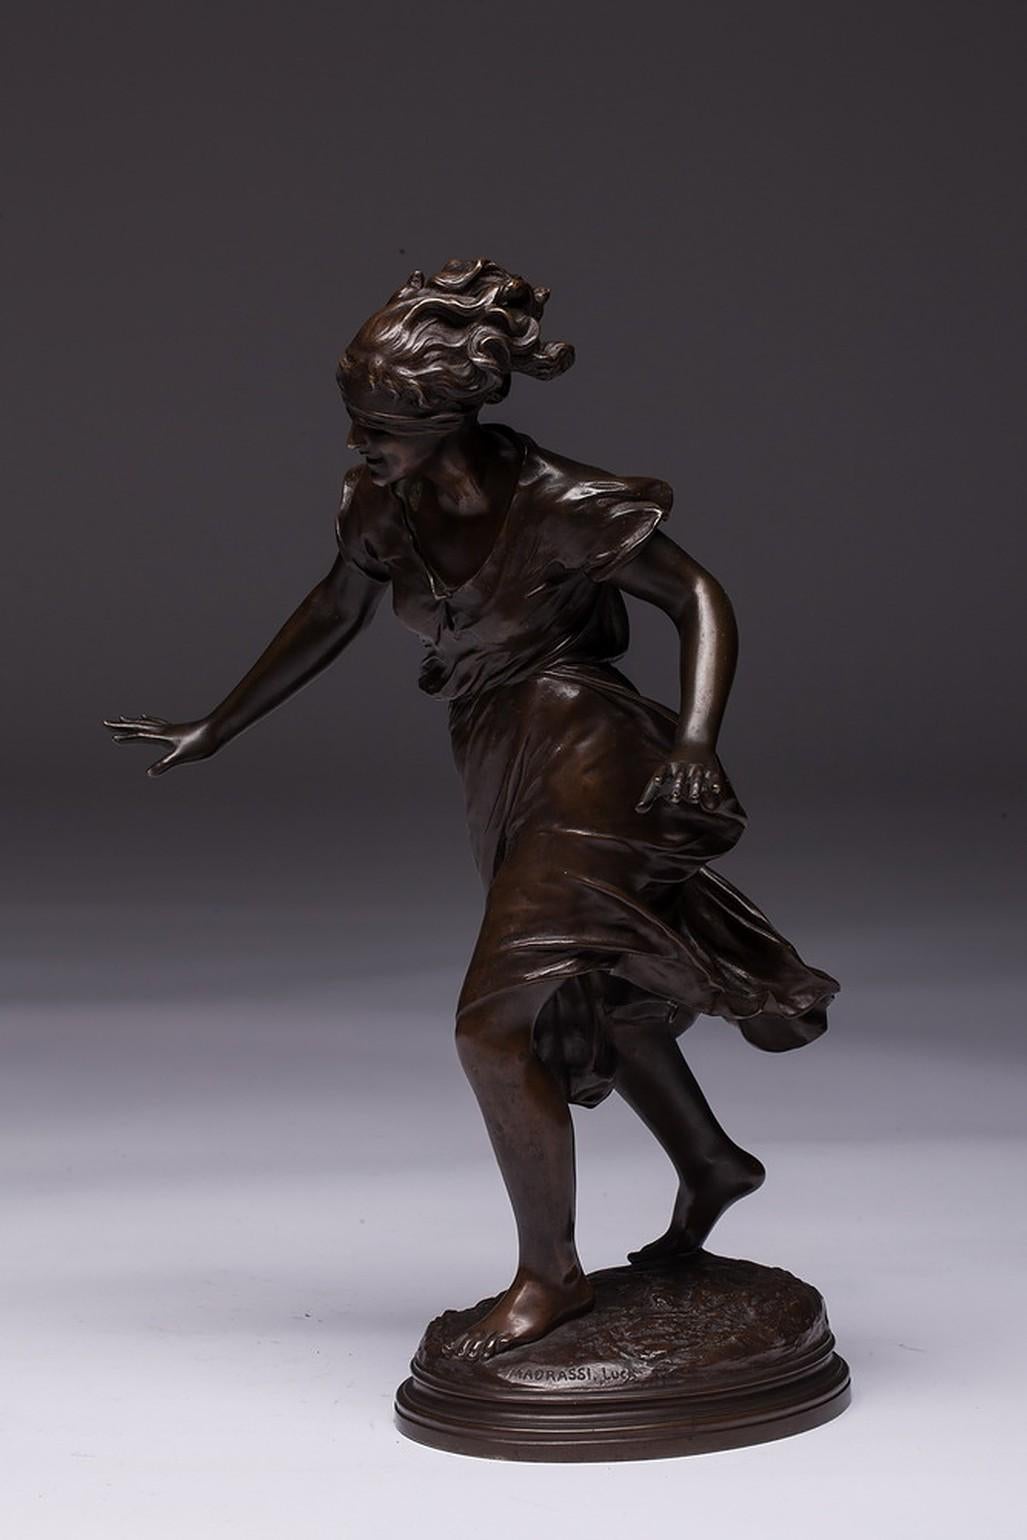 Luca Madrassi signed bronze sculpture inscribed 'L.MADRASSI.' Young woman is playing hide and seek. The woman's eyes are covered with a ligament. Very playful statue.
Luca Madrassi was an Italian-born French artist best known for his bronze Art